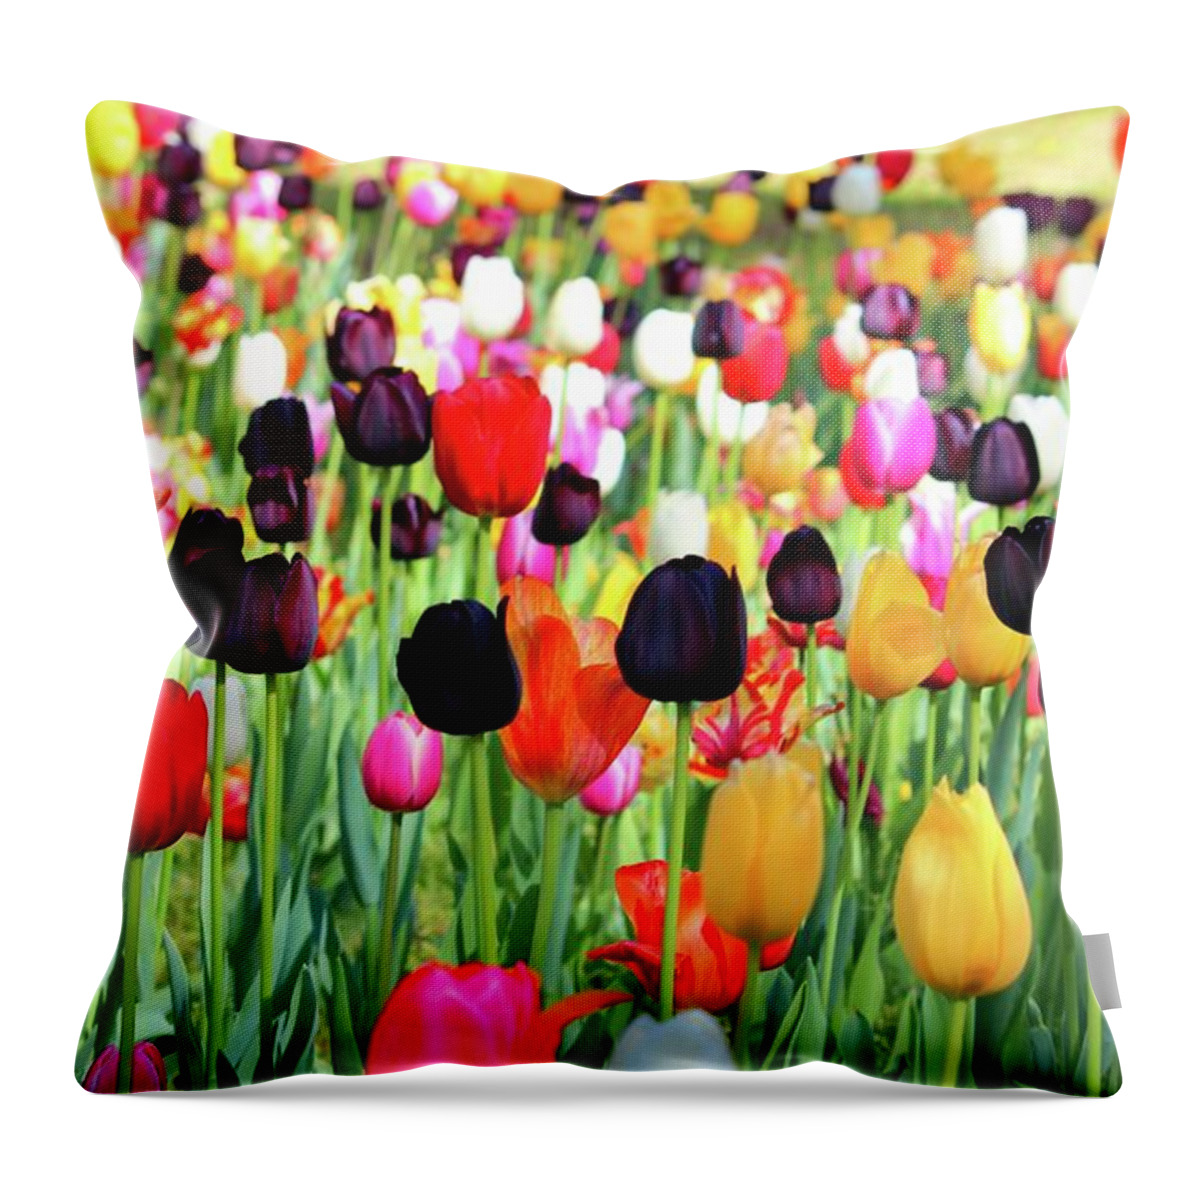 Tulip Throw Pillow featuring the photograph The Season Of Tulips by Cynthia Guinn